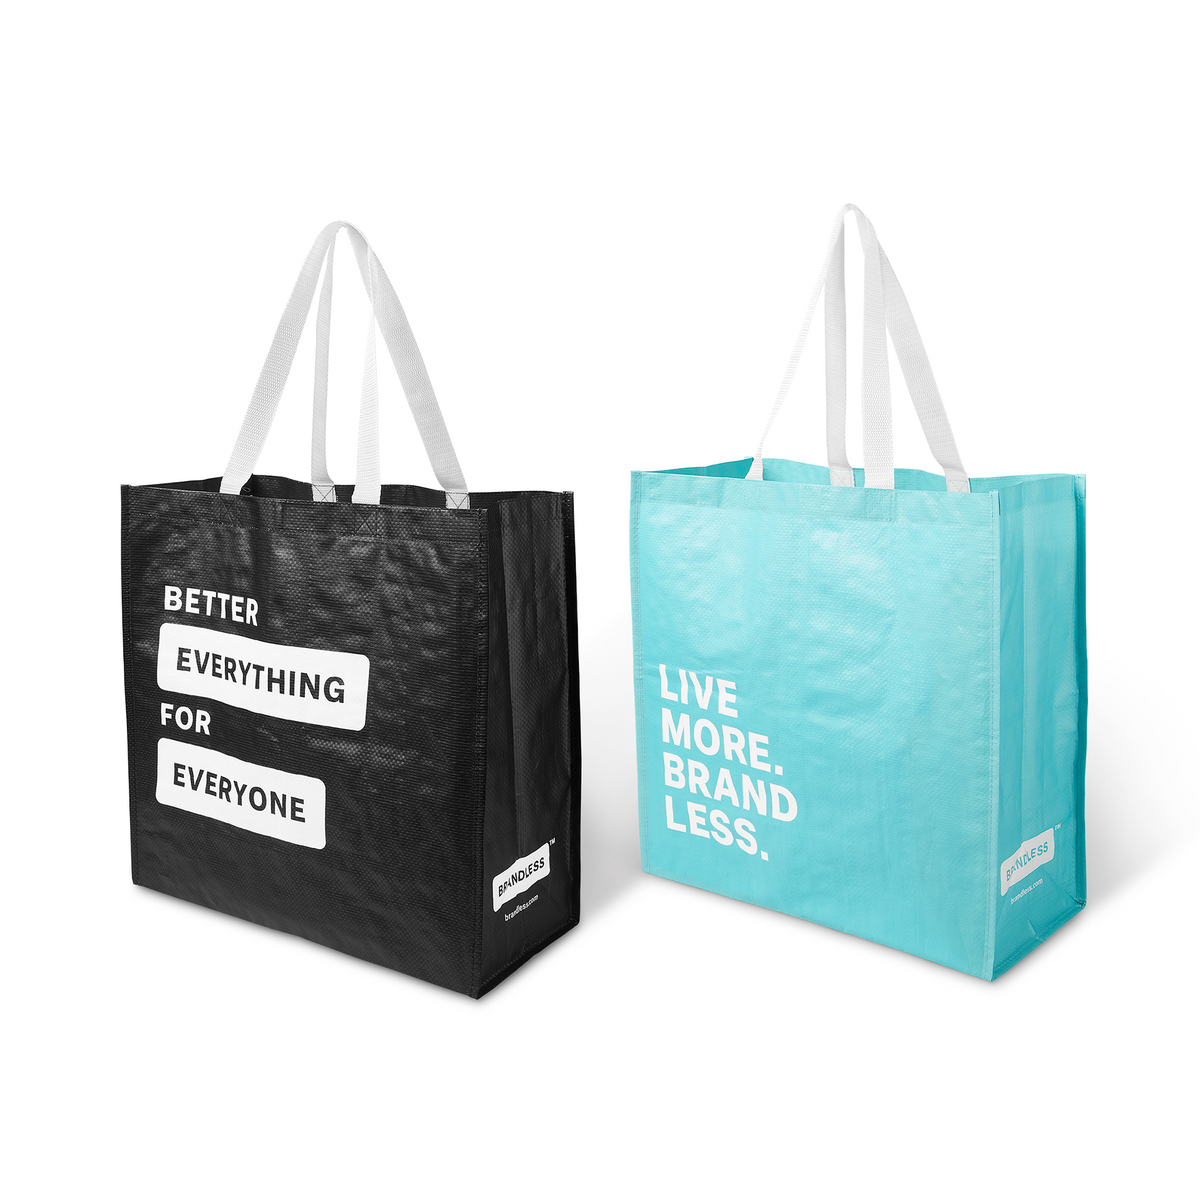 3/4 view of both black and teal bags showing their slogan-printed sizeds of better everything for everyone and live move brand less.